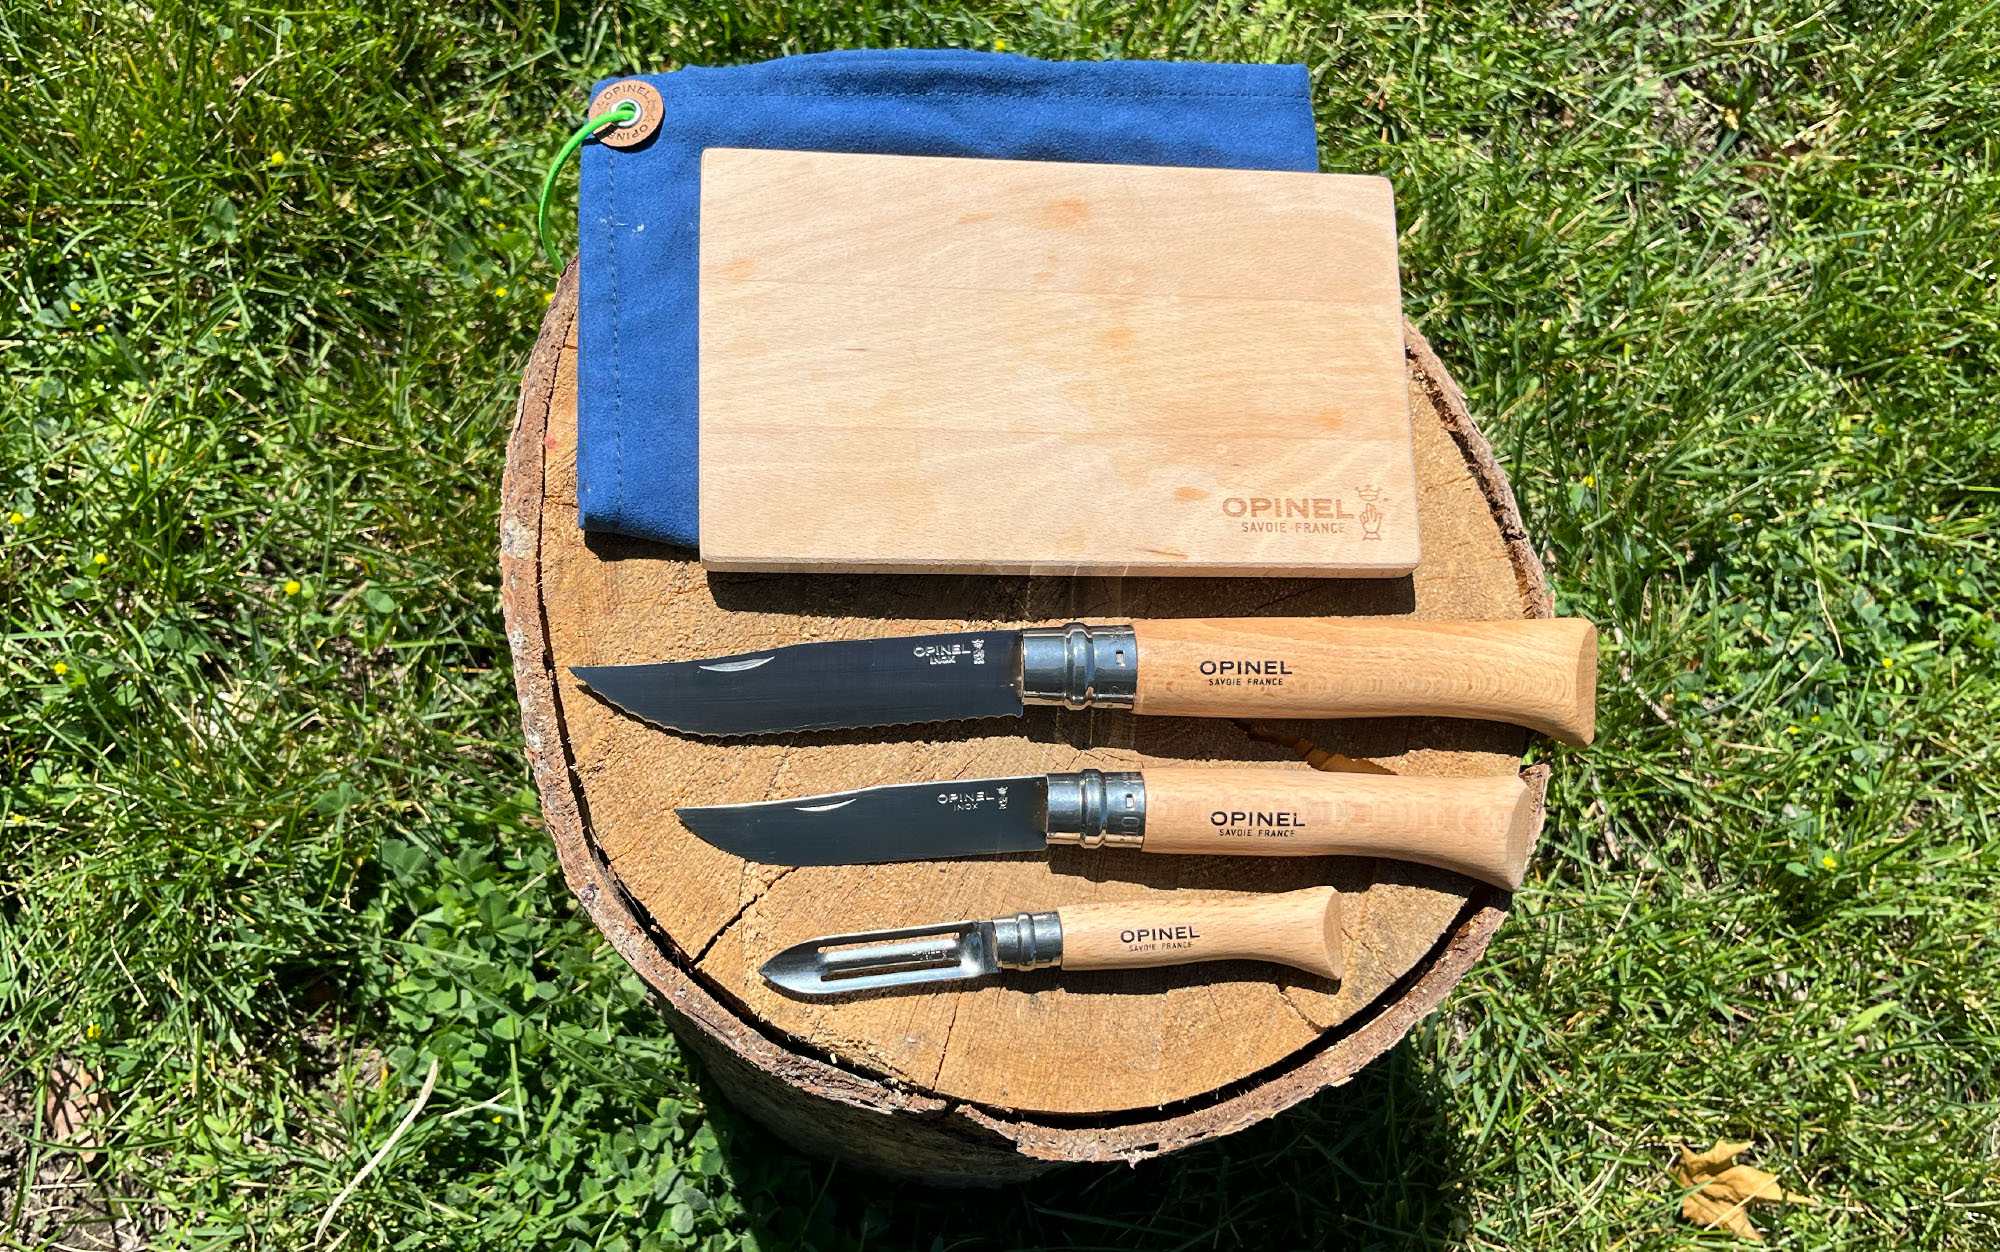 The Opinel Nomad Cooking Kit is best for cooking.